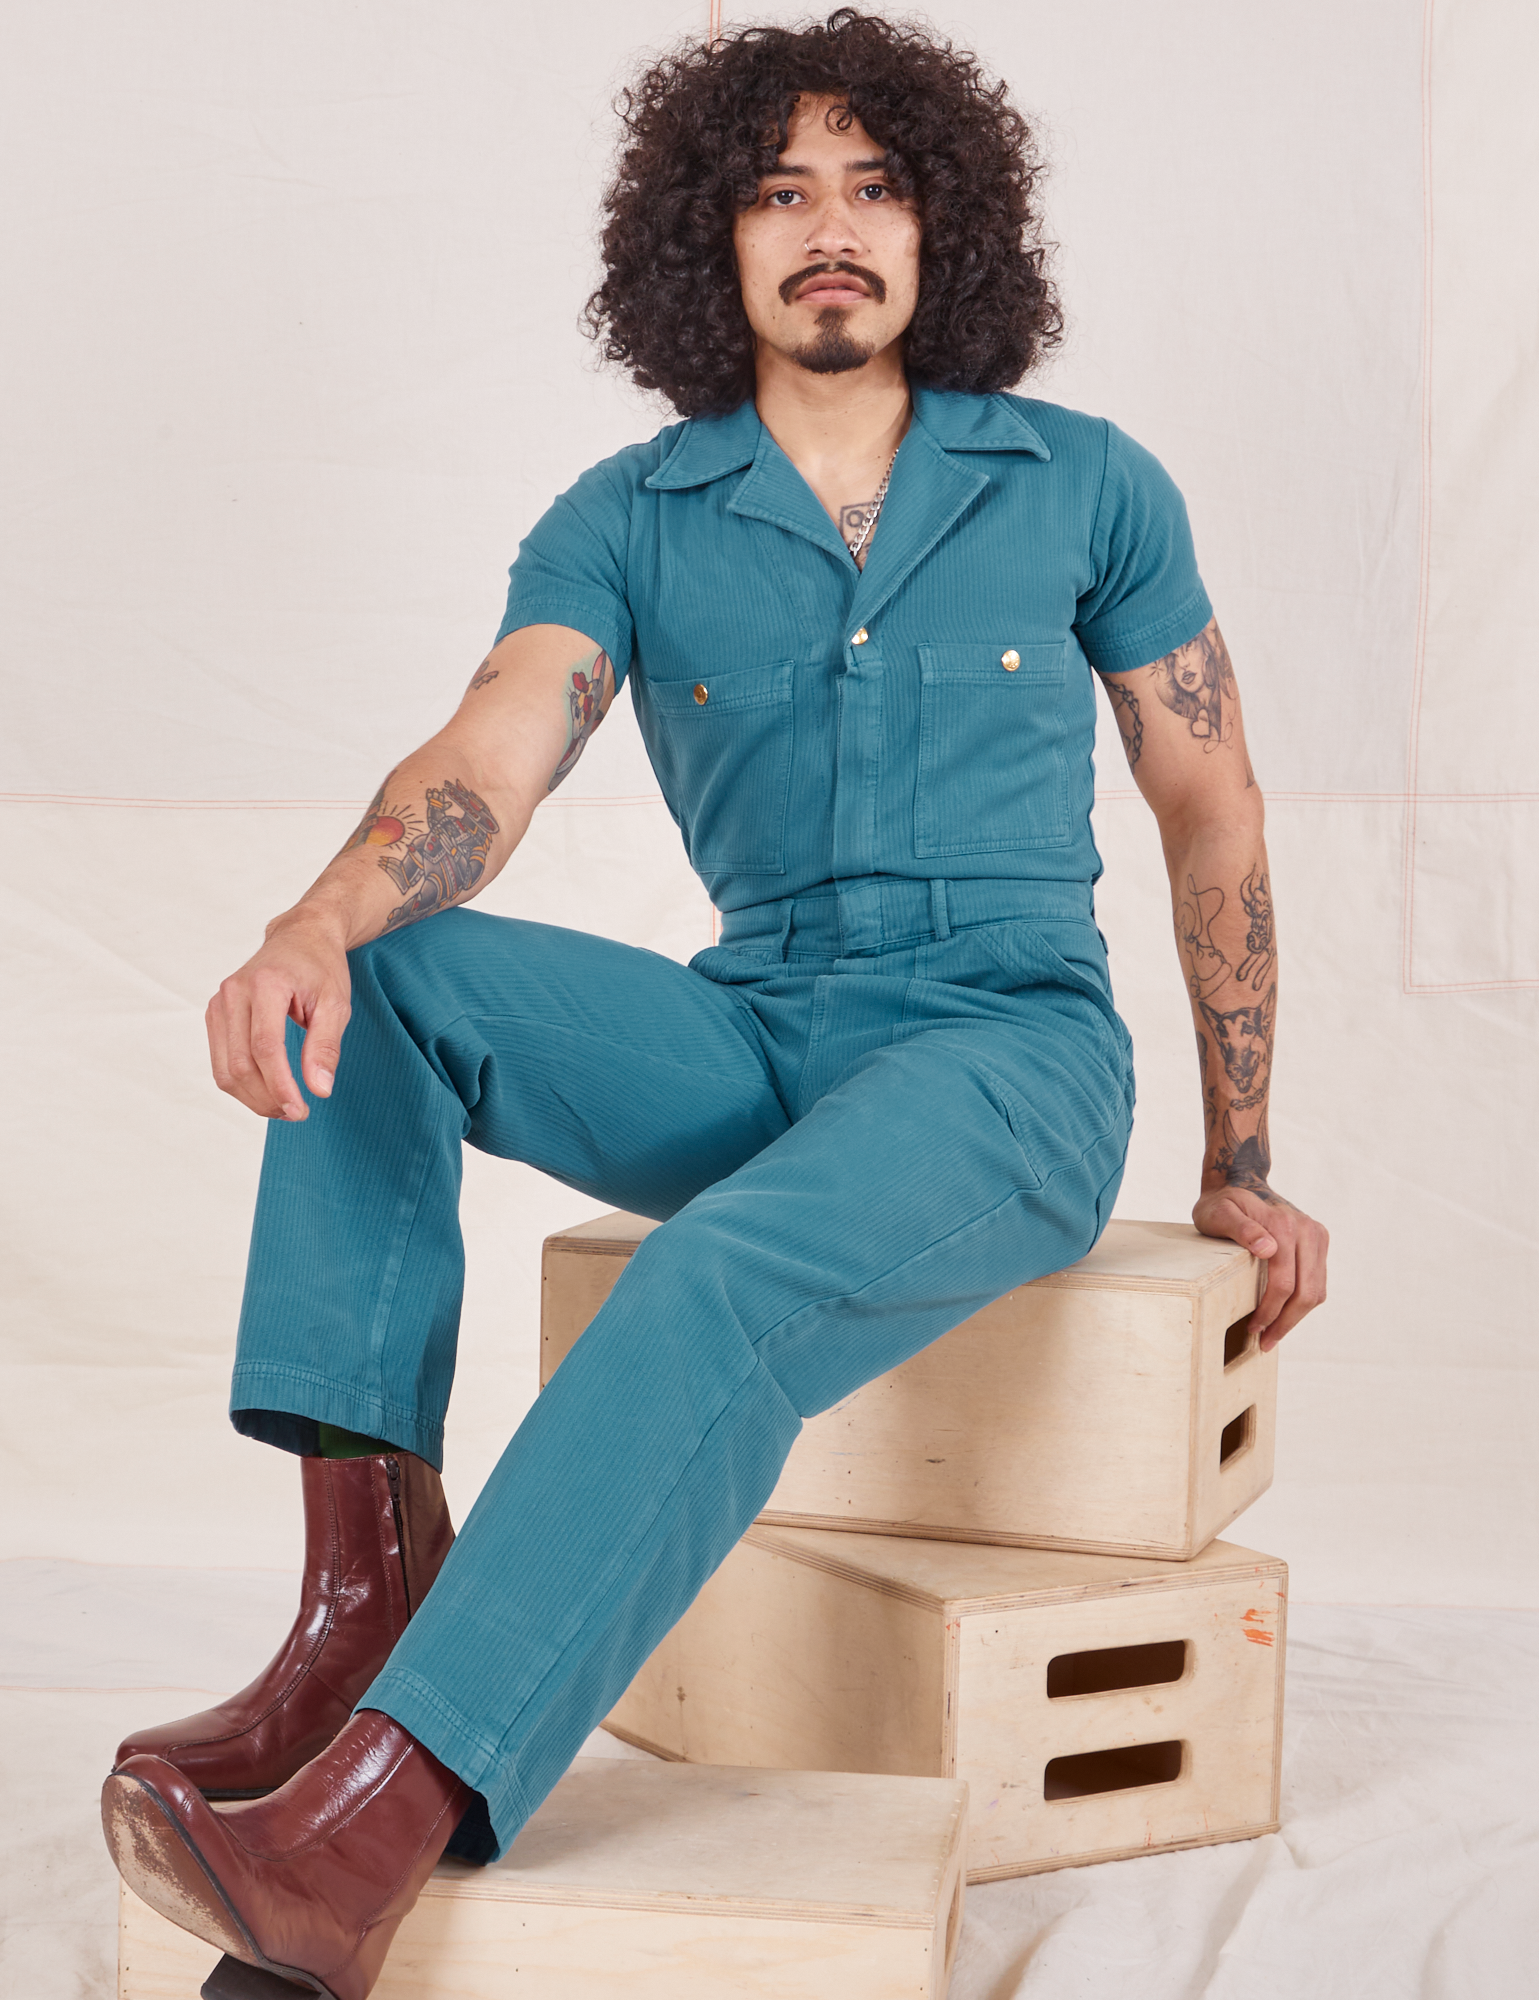 Jesse is 5'8" and wearing size S in Heritage Short Sleeve Jumpsuit in Marine Blue sitting on a stack of wooden crates